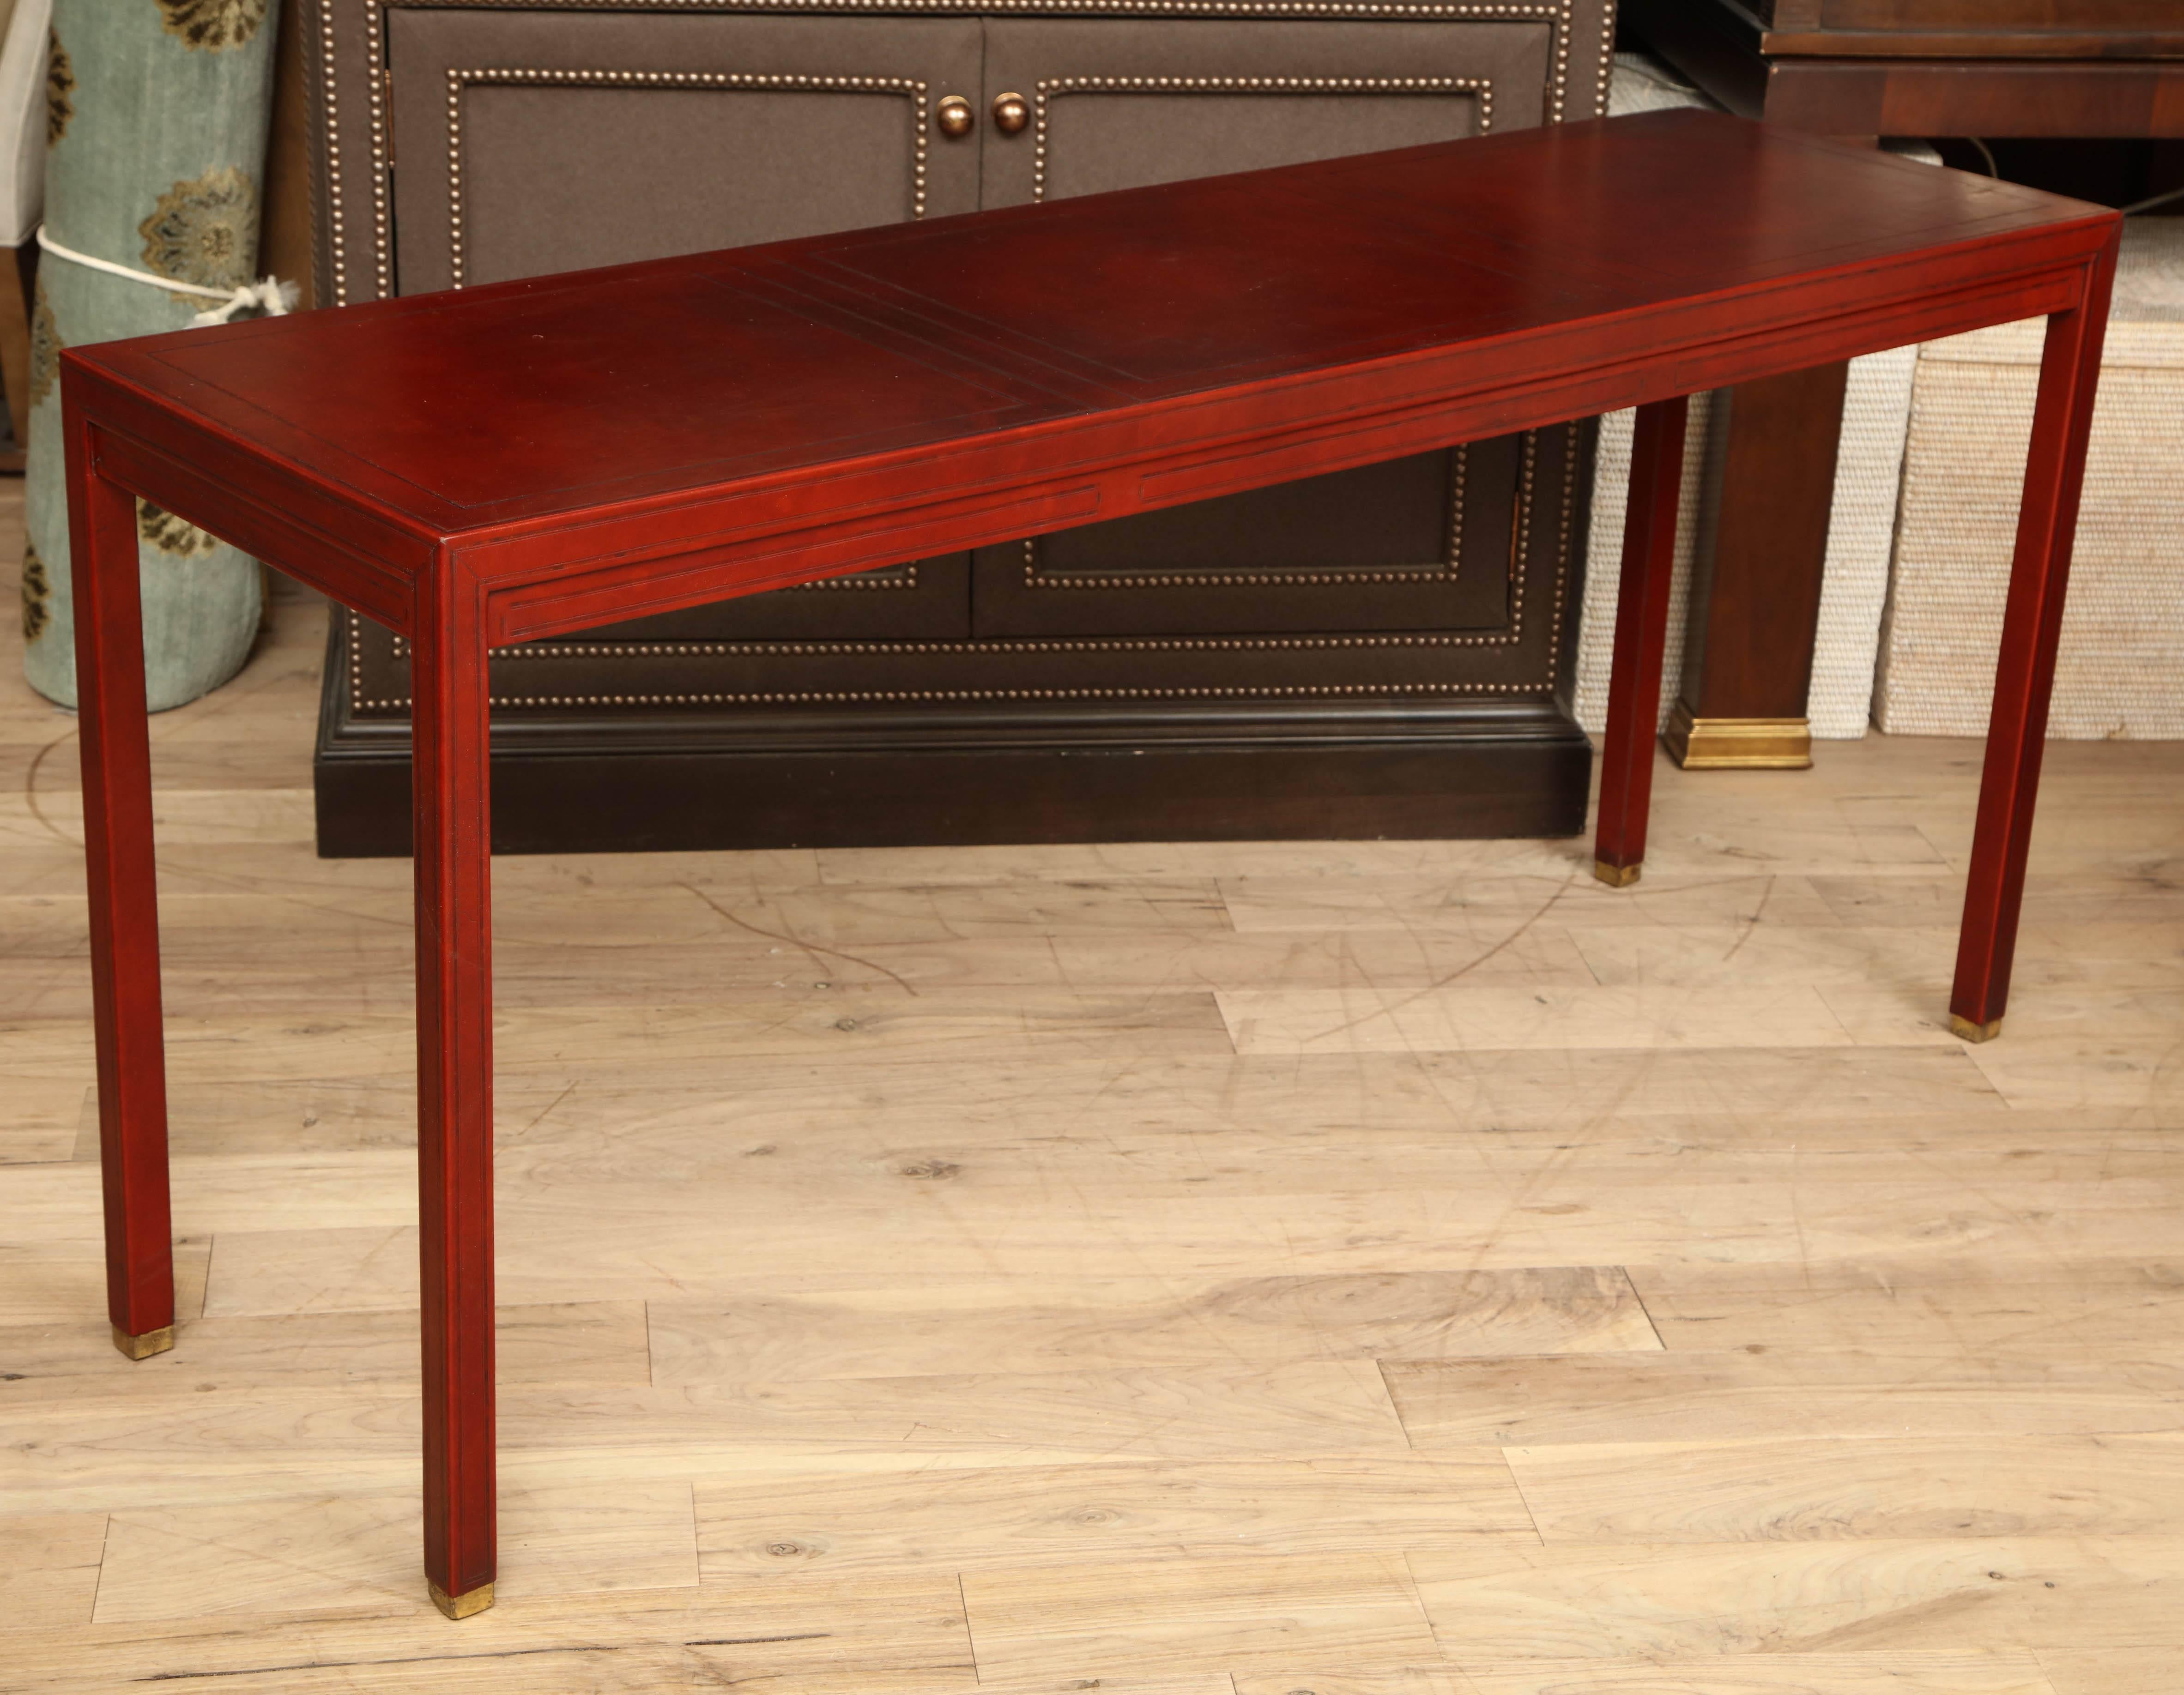 Walnut console table with brass feet, circa 1970, restored and clad in russet leather with blind tooled surface.